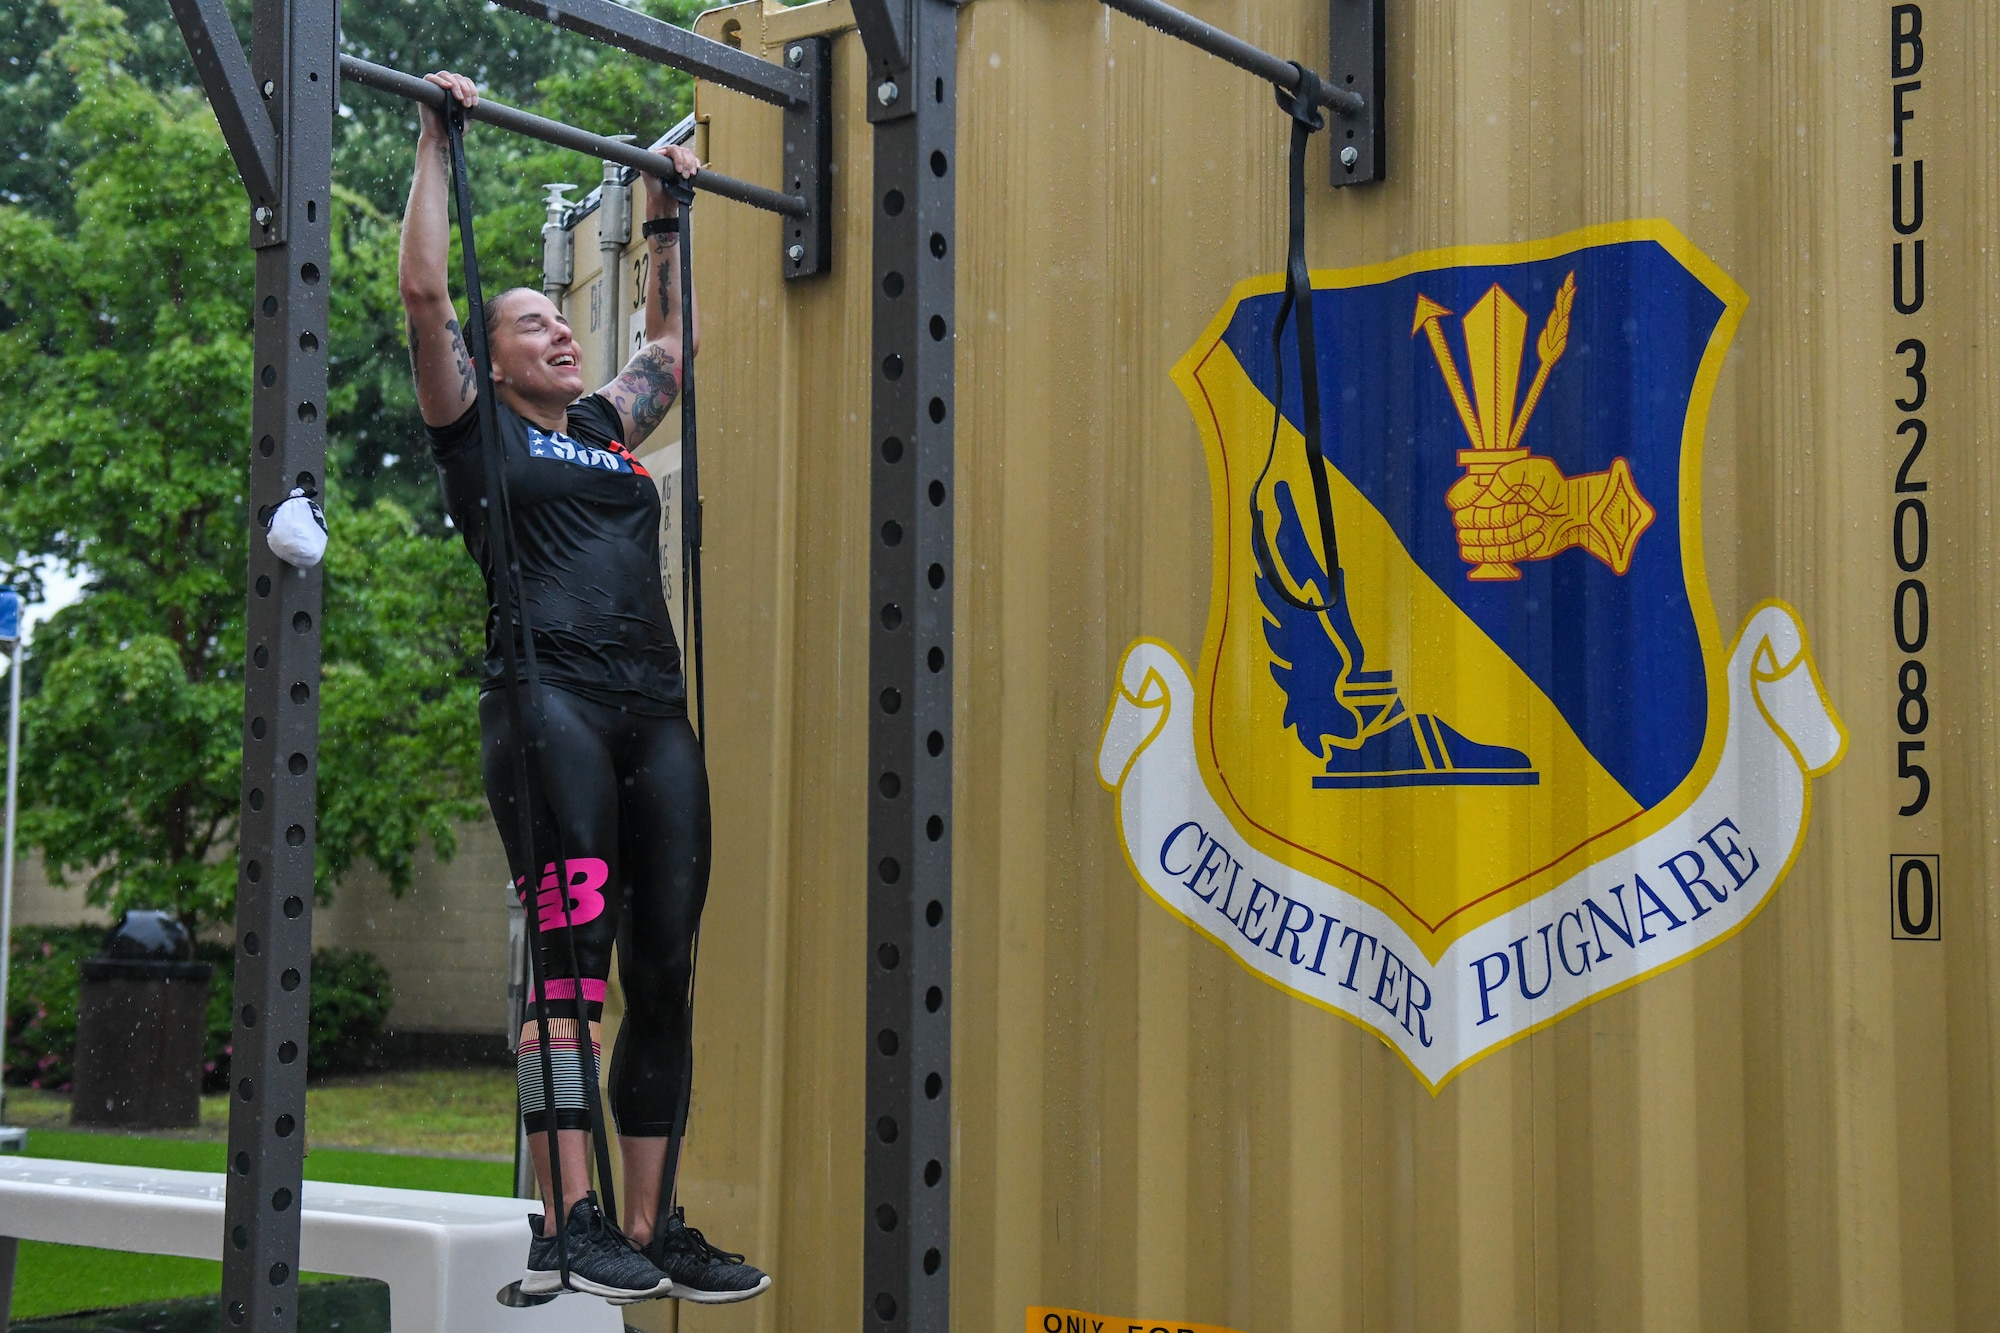 Senior Master Sgt. Denielle Hilliard, 374th Force Support Squadron sustainment services superintendent, performs pull-ups during a Murph challenge, at Yokota Air Base, Japan, May 27, 2022. The challenge coincided with a box gym grand opening at the base natatorium. (U.S. Air Force photo by Staff Sgt. Jessica Avallone)